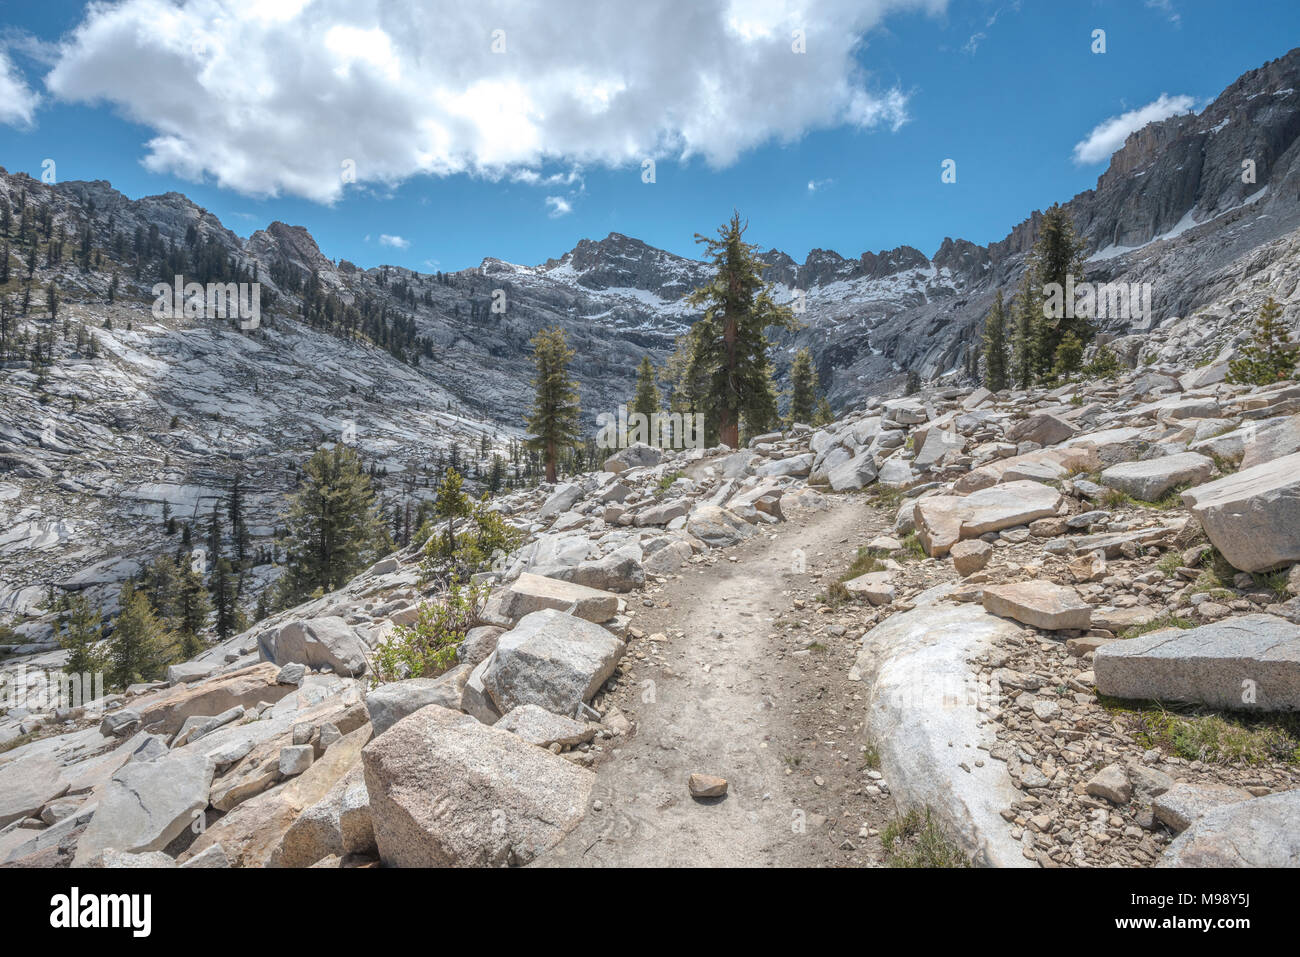 The Lakes Trail is a 13 mile trail in Sequoia National Park that leads to four snow-melt lakes, Heather, Emerald, Aster, and Peak Lake. Stock Photo